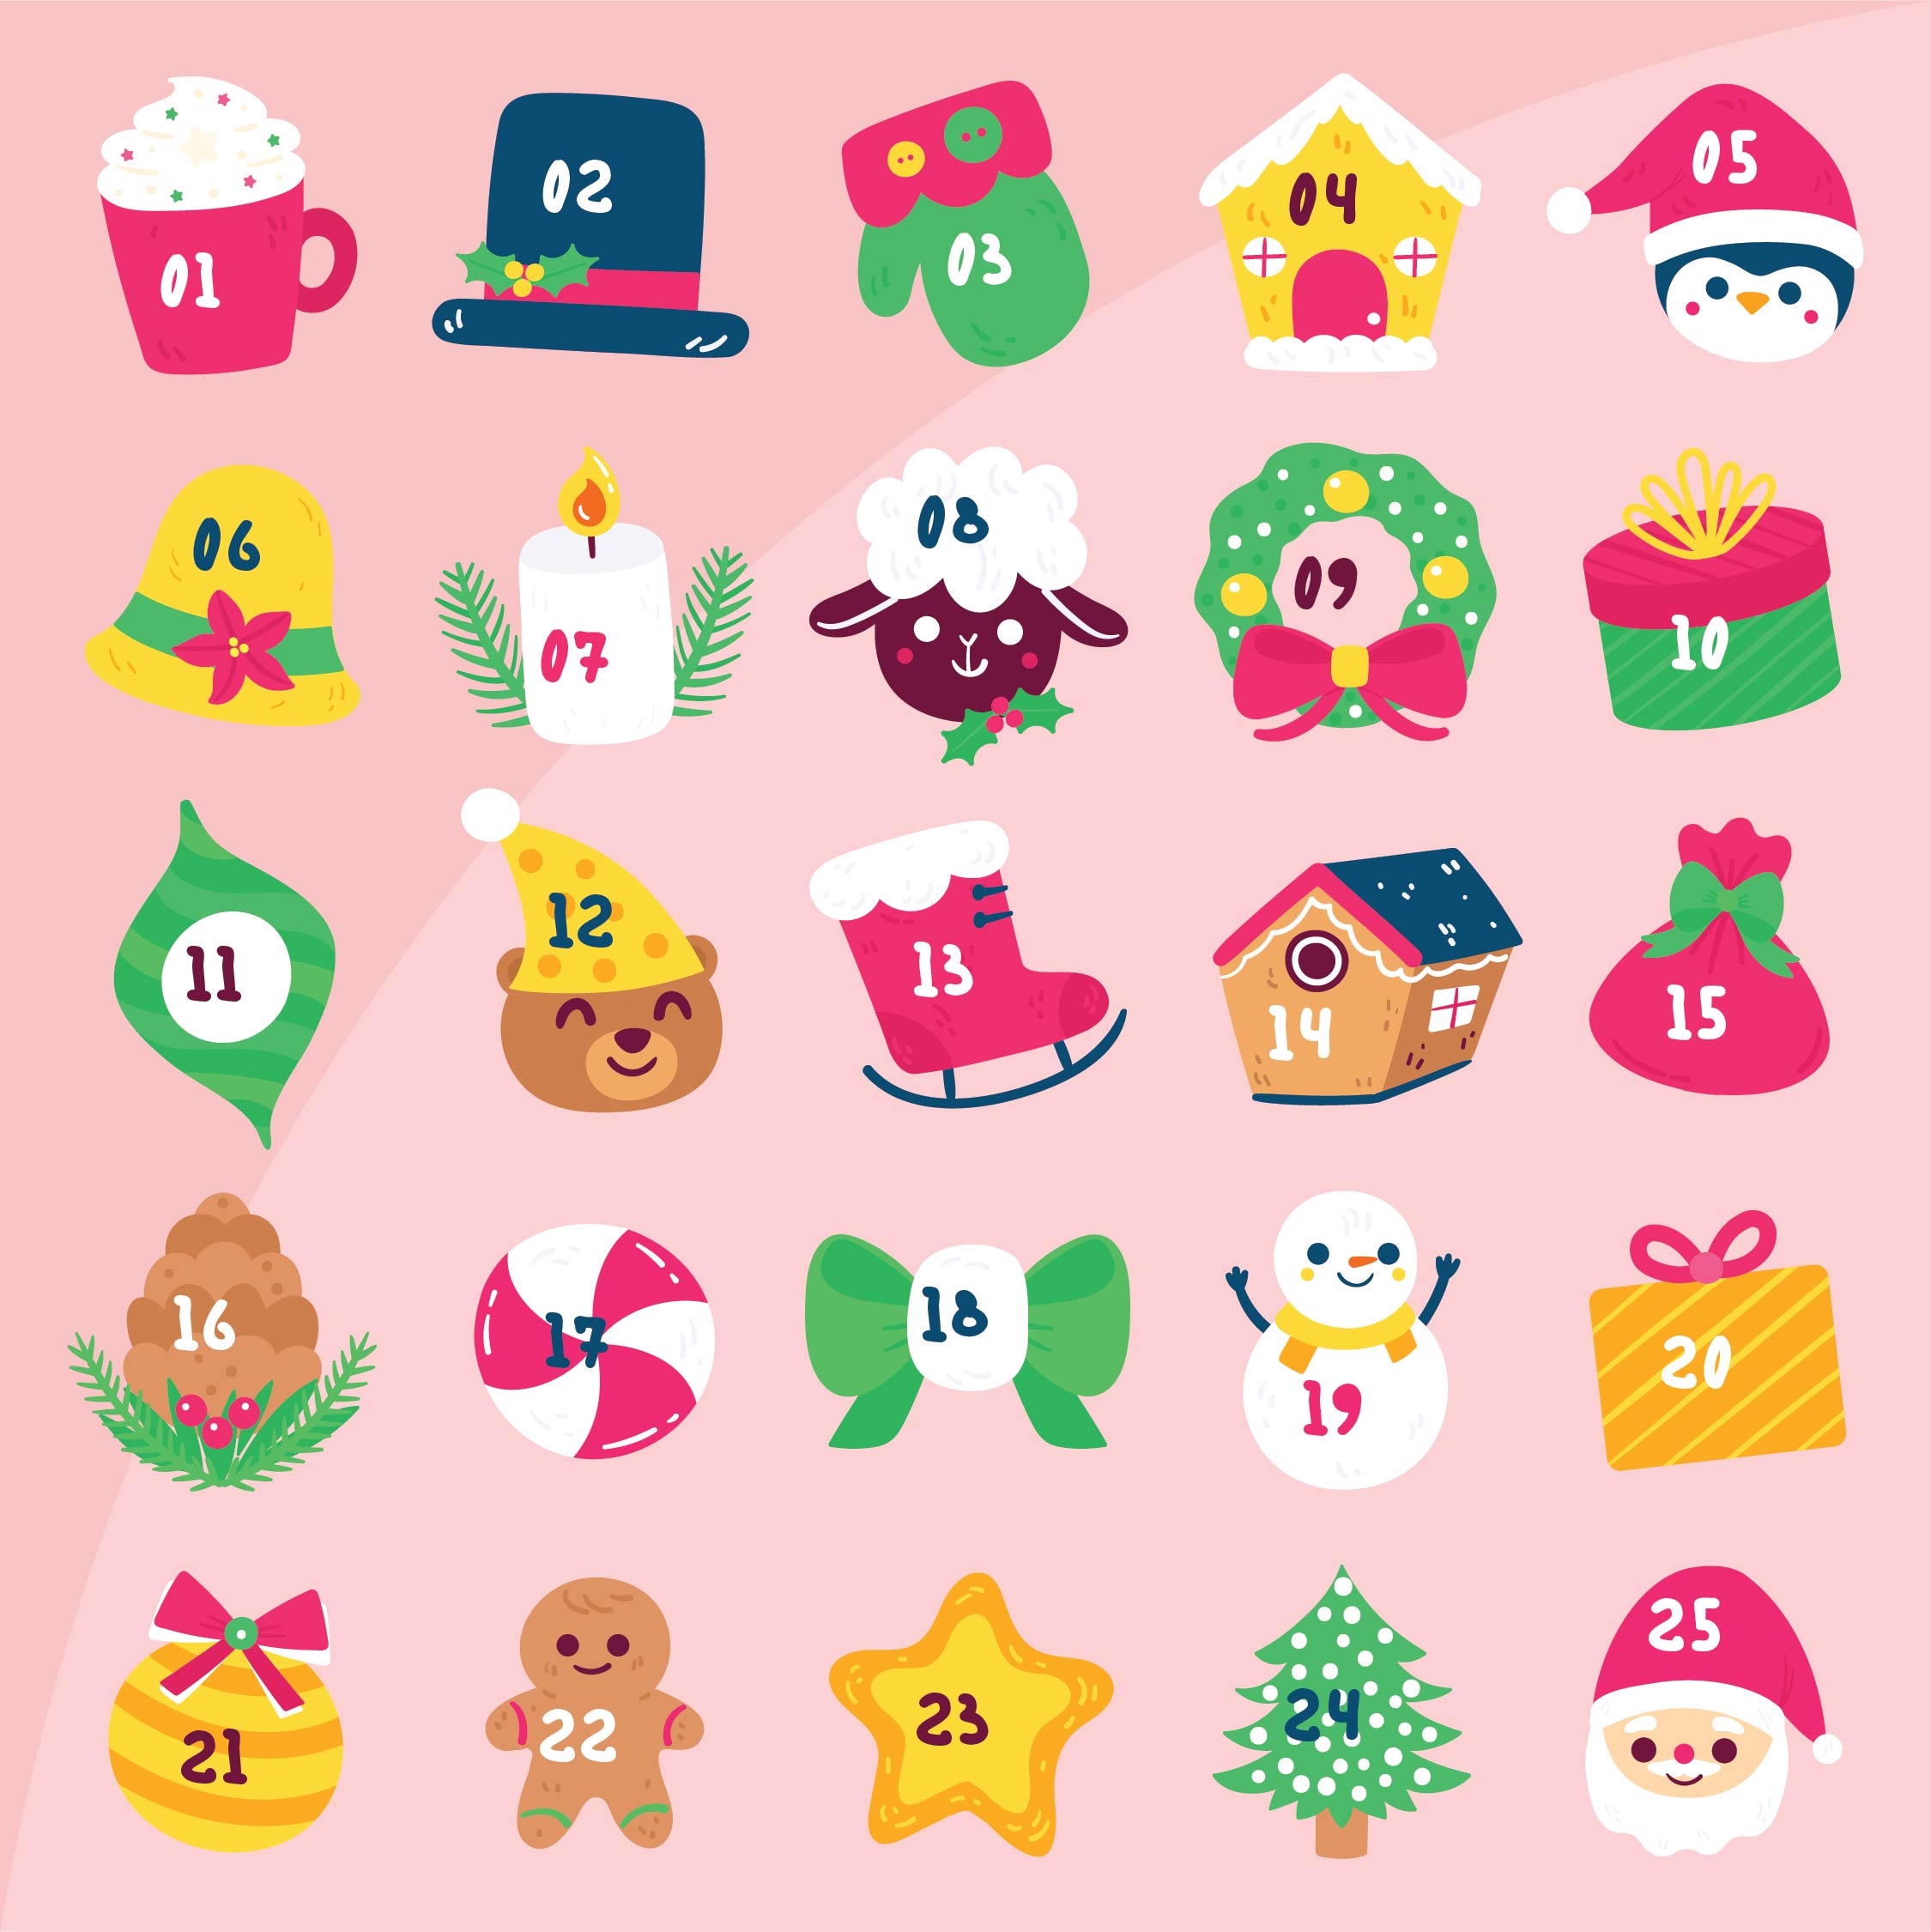 7 Best Images of Christmas Printable Number Stickers Free Printable